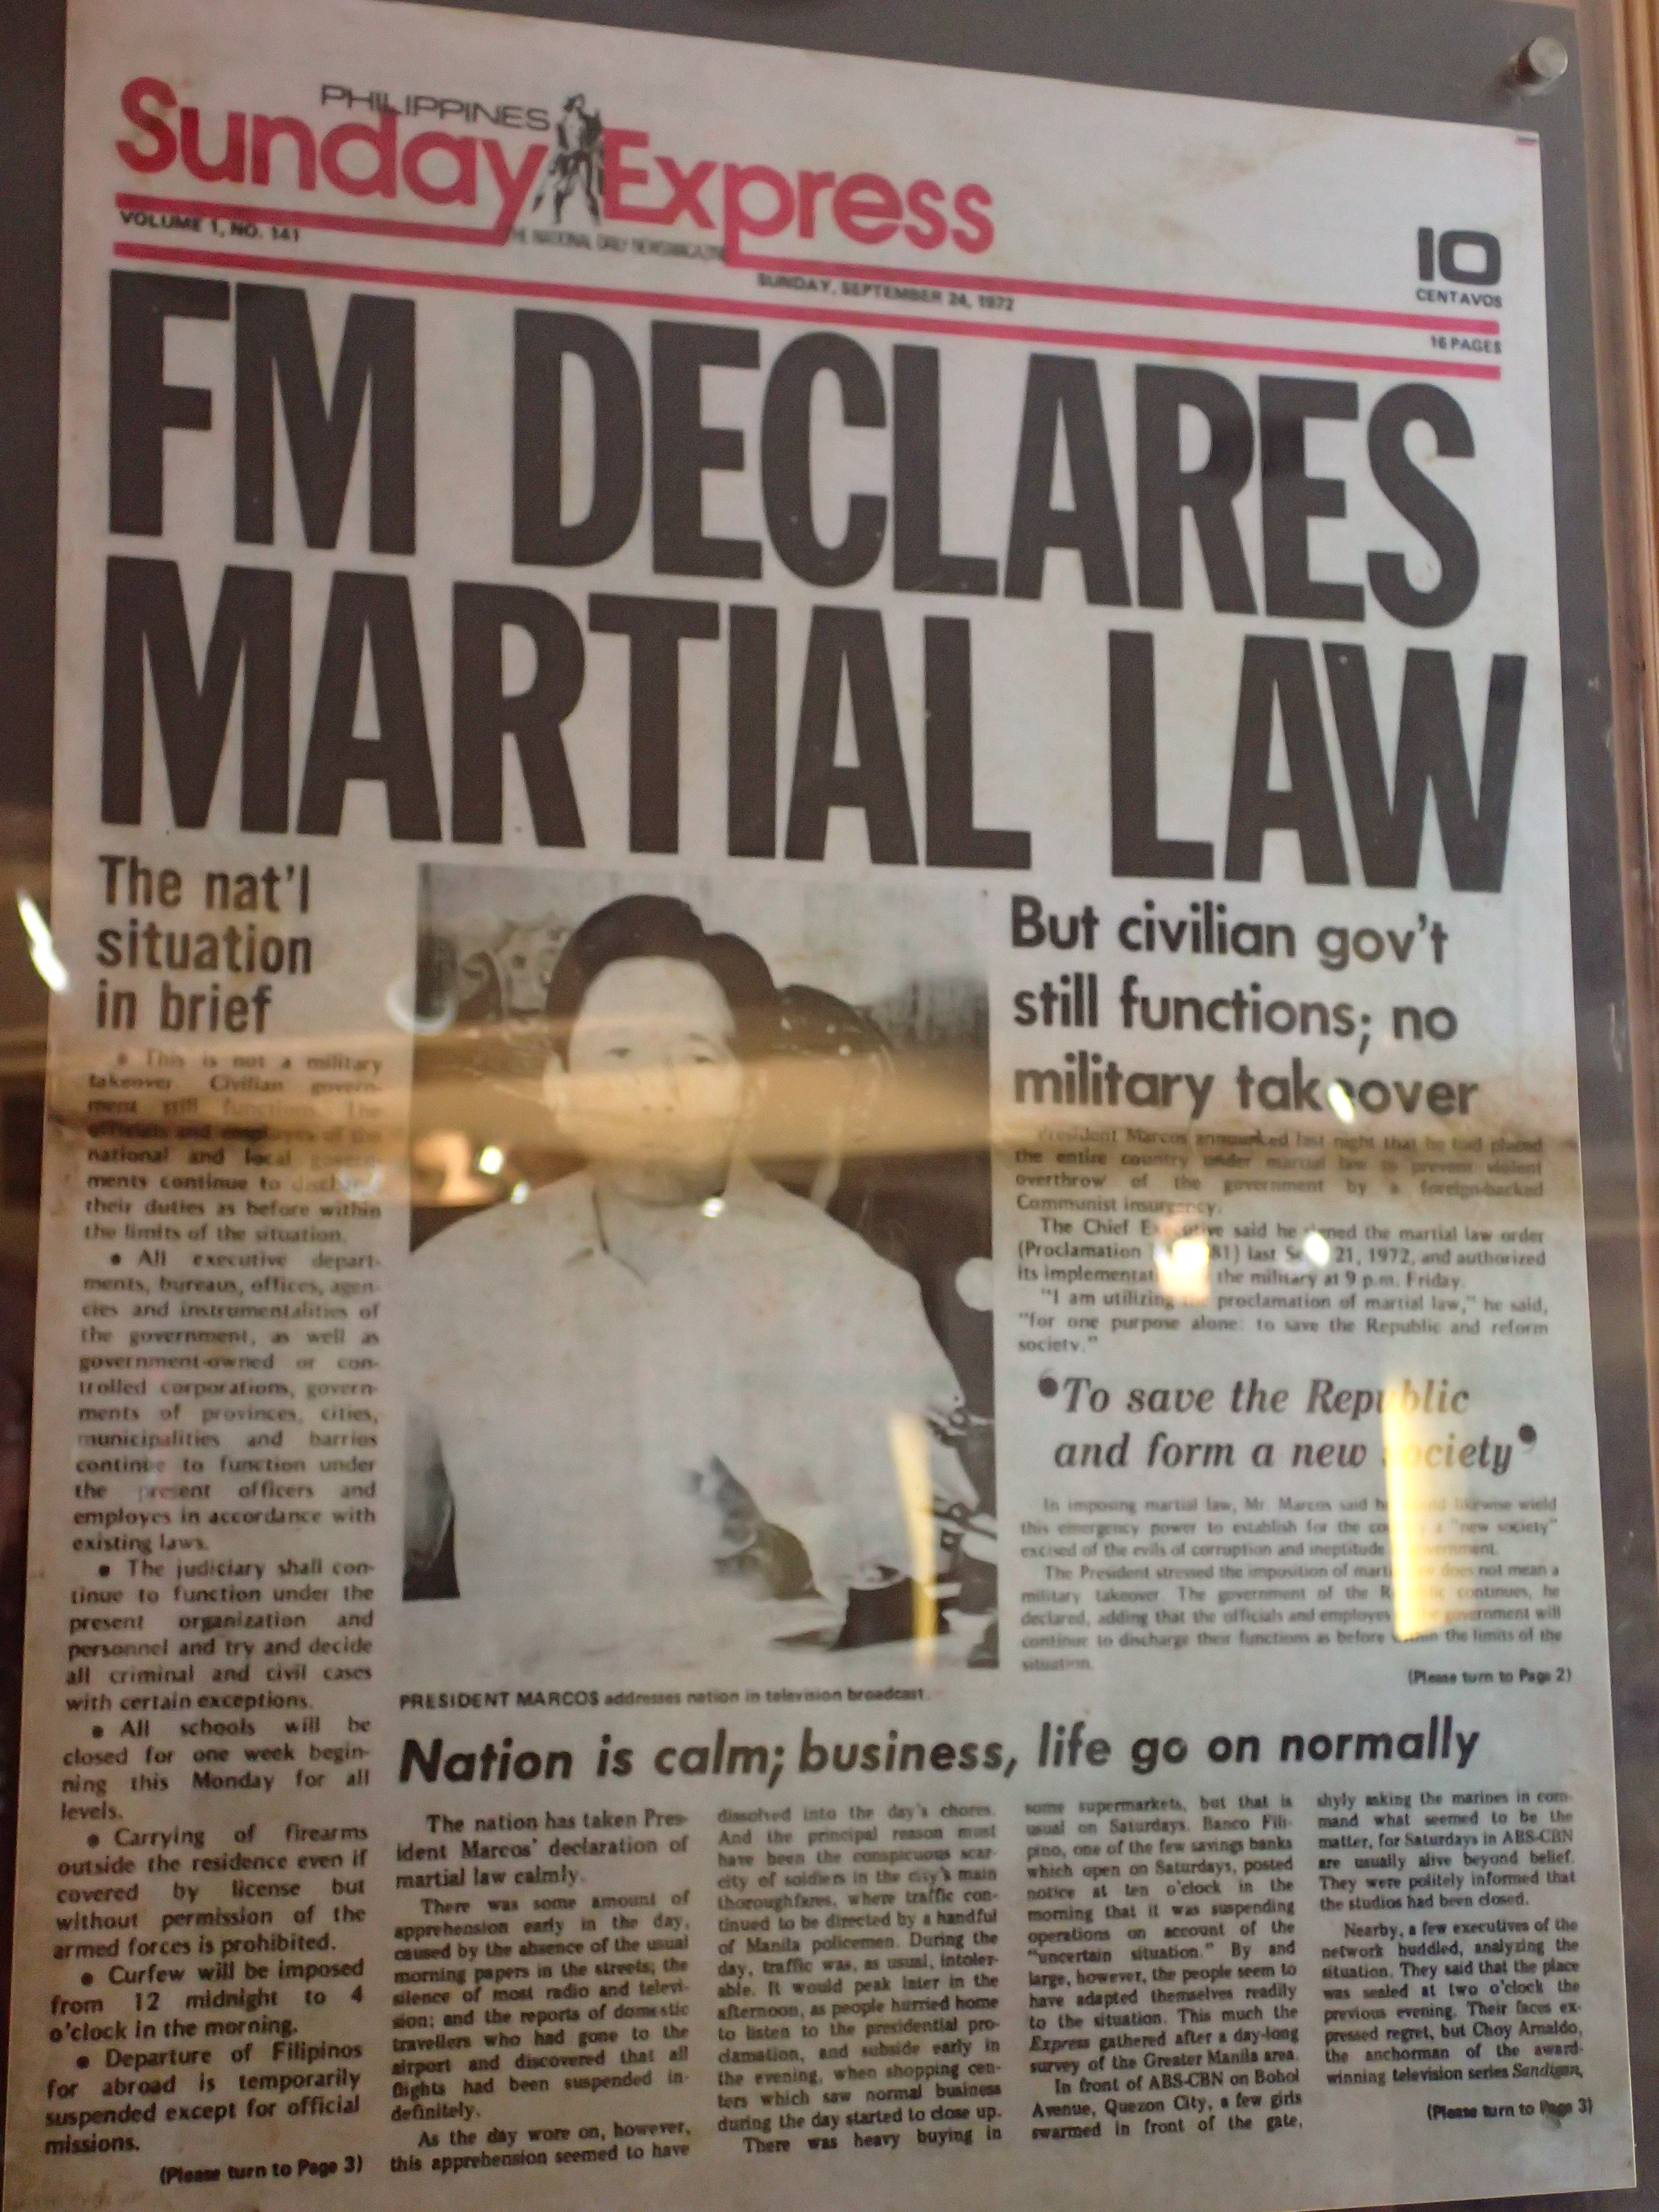 types of martial law